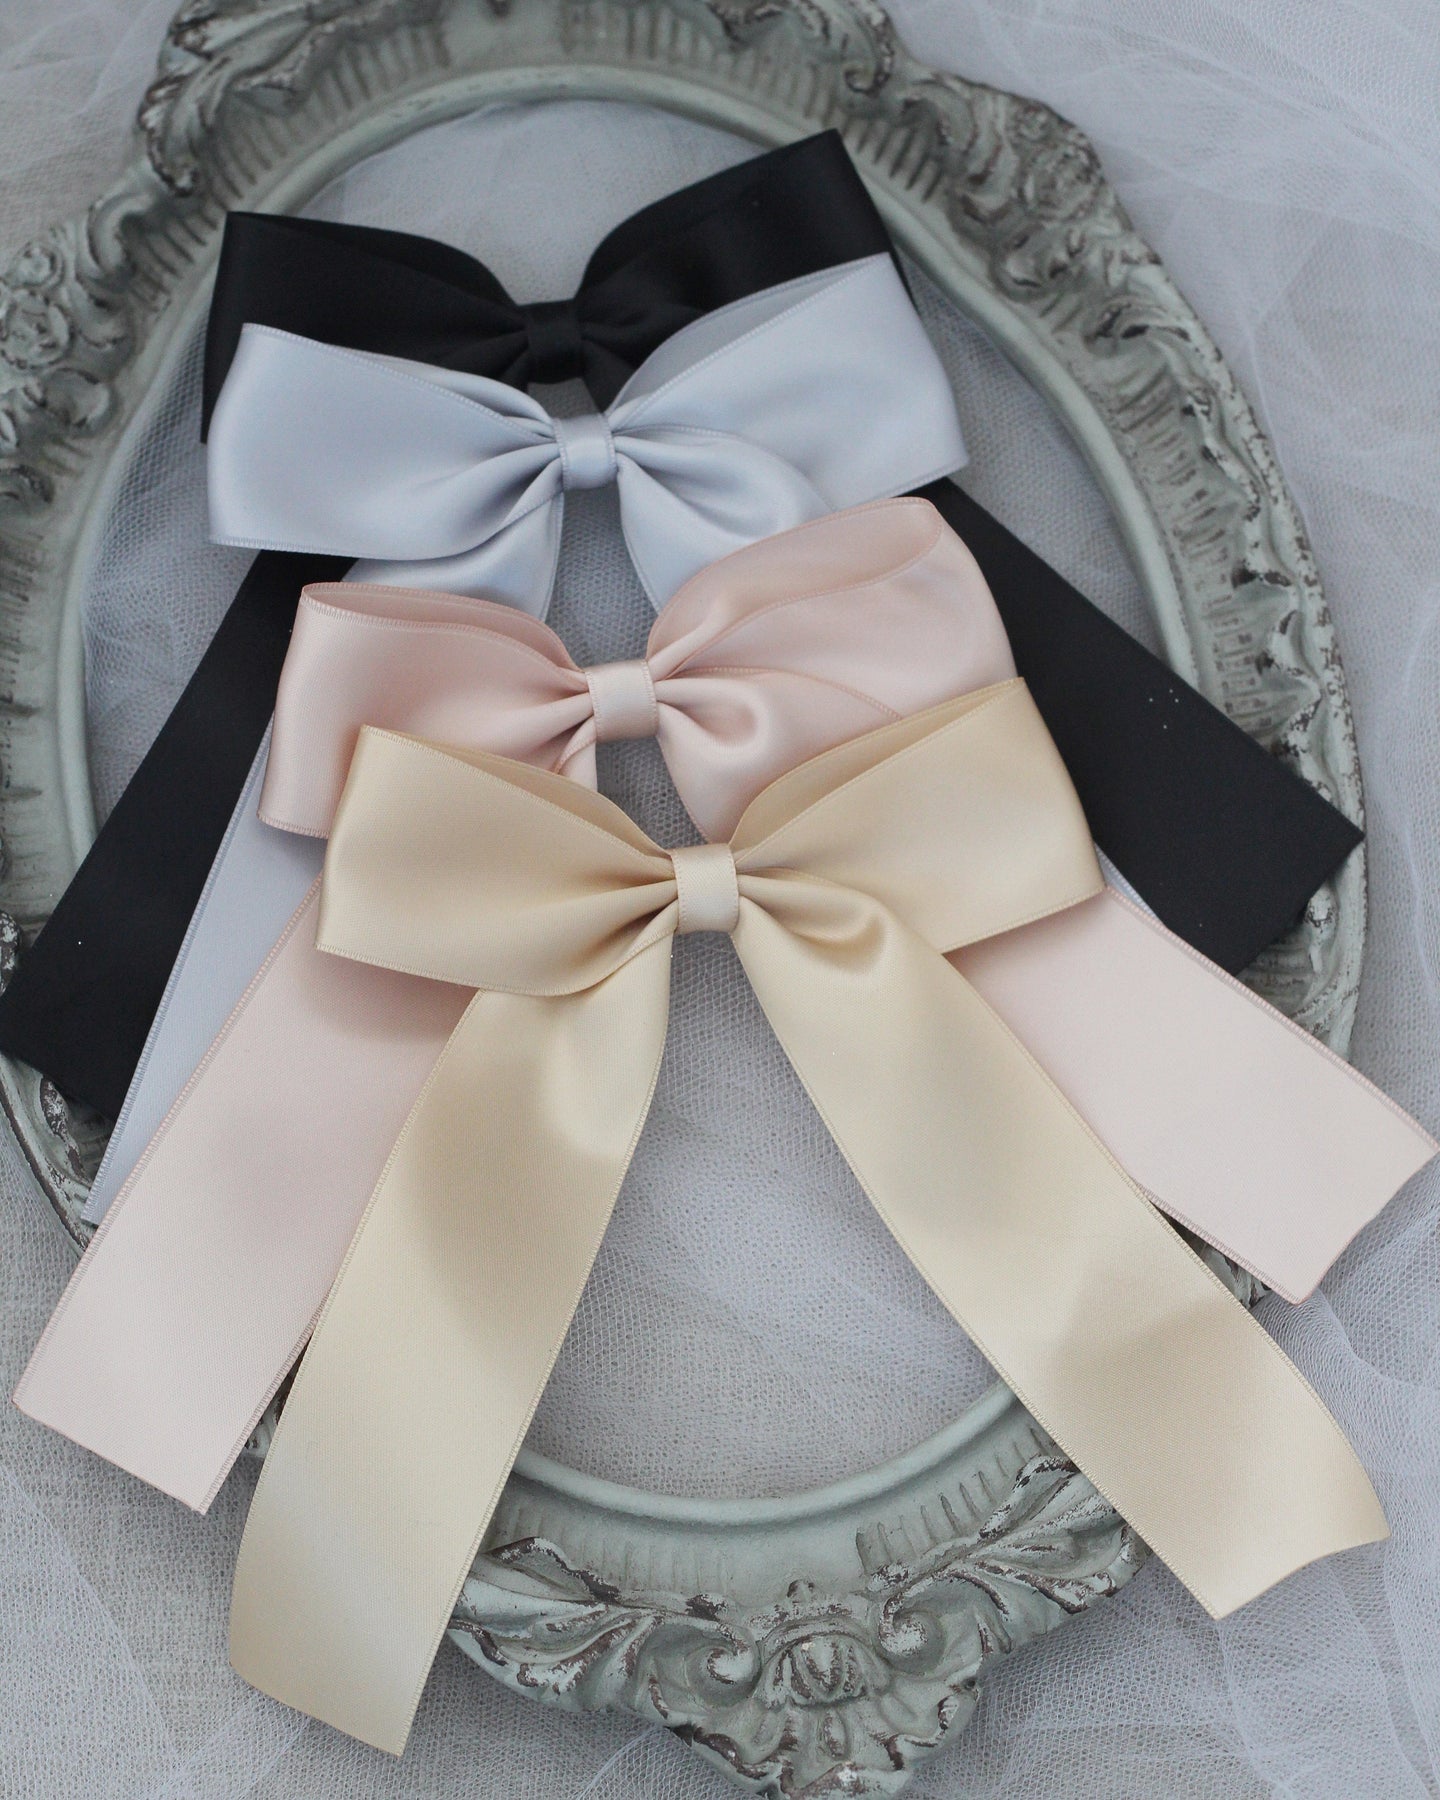 Cheap Hair Bows for Women Hair Bow Clips, Bow Hair Clips with Long Tail,Bow  Ribbons for Hair,Solid Tassel Hair Clip Bow